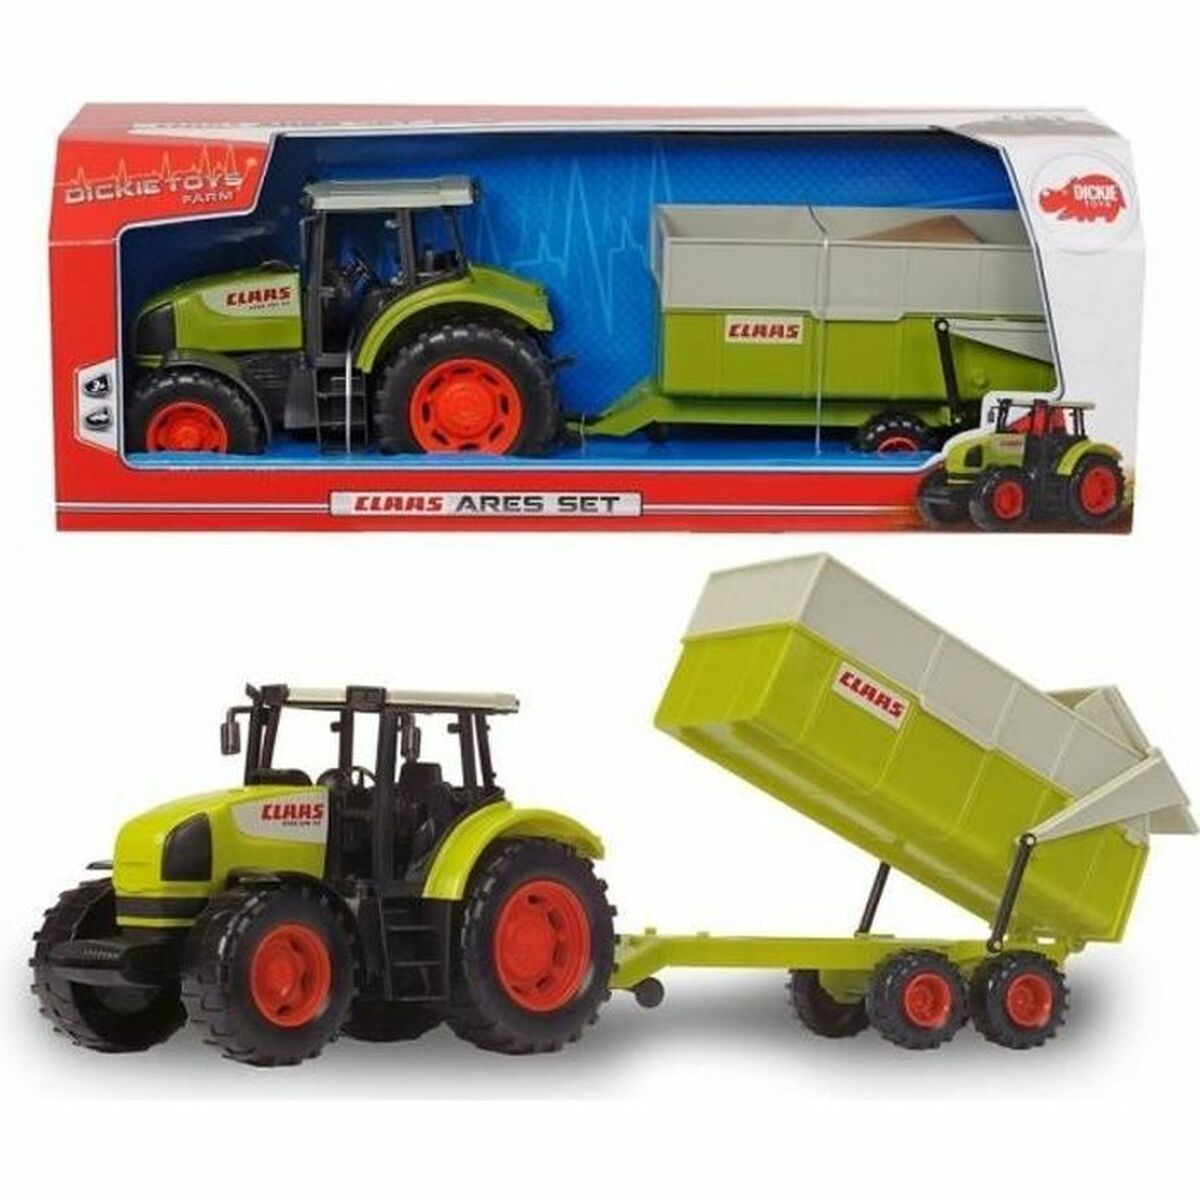 Tracteur jouet Dickie Toys Cars Ares Set